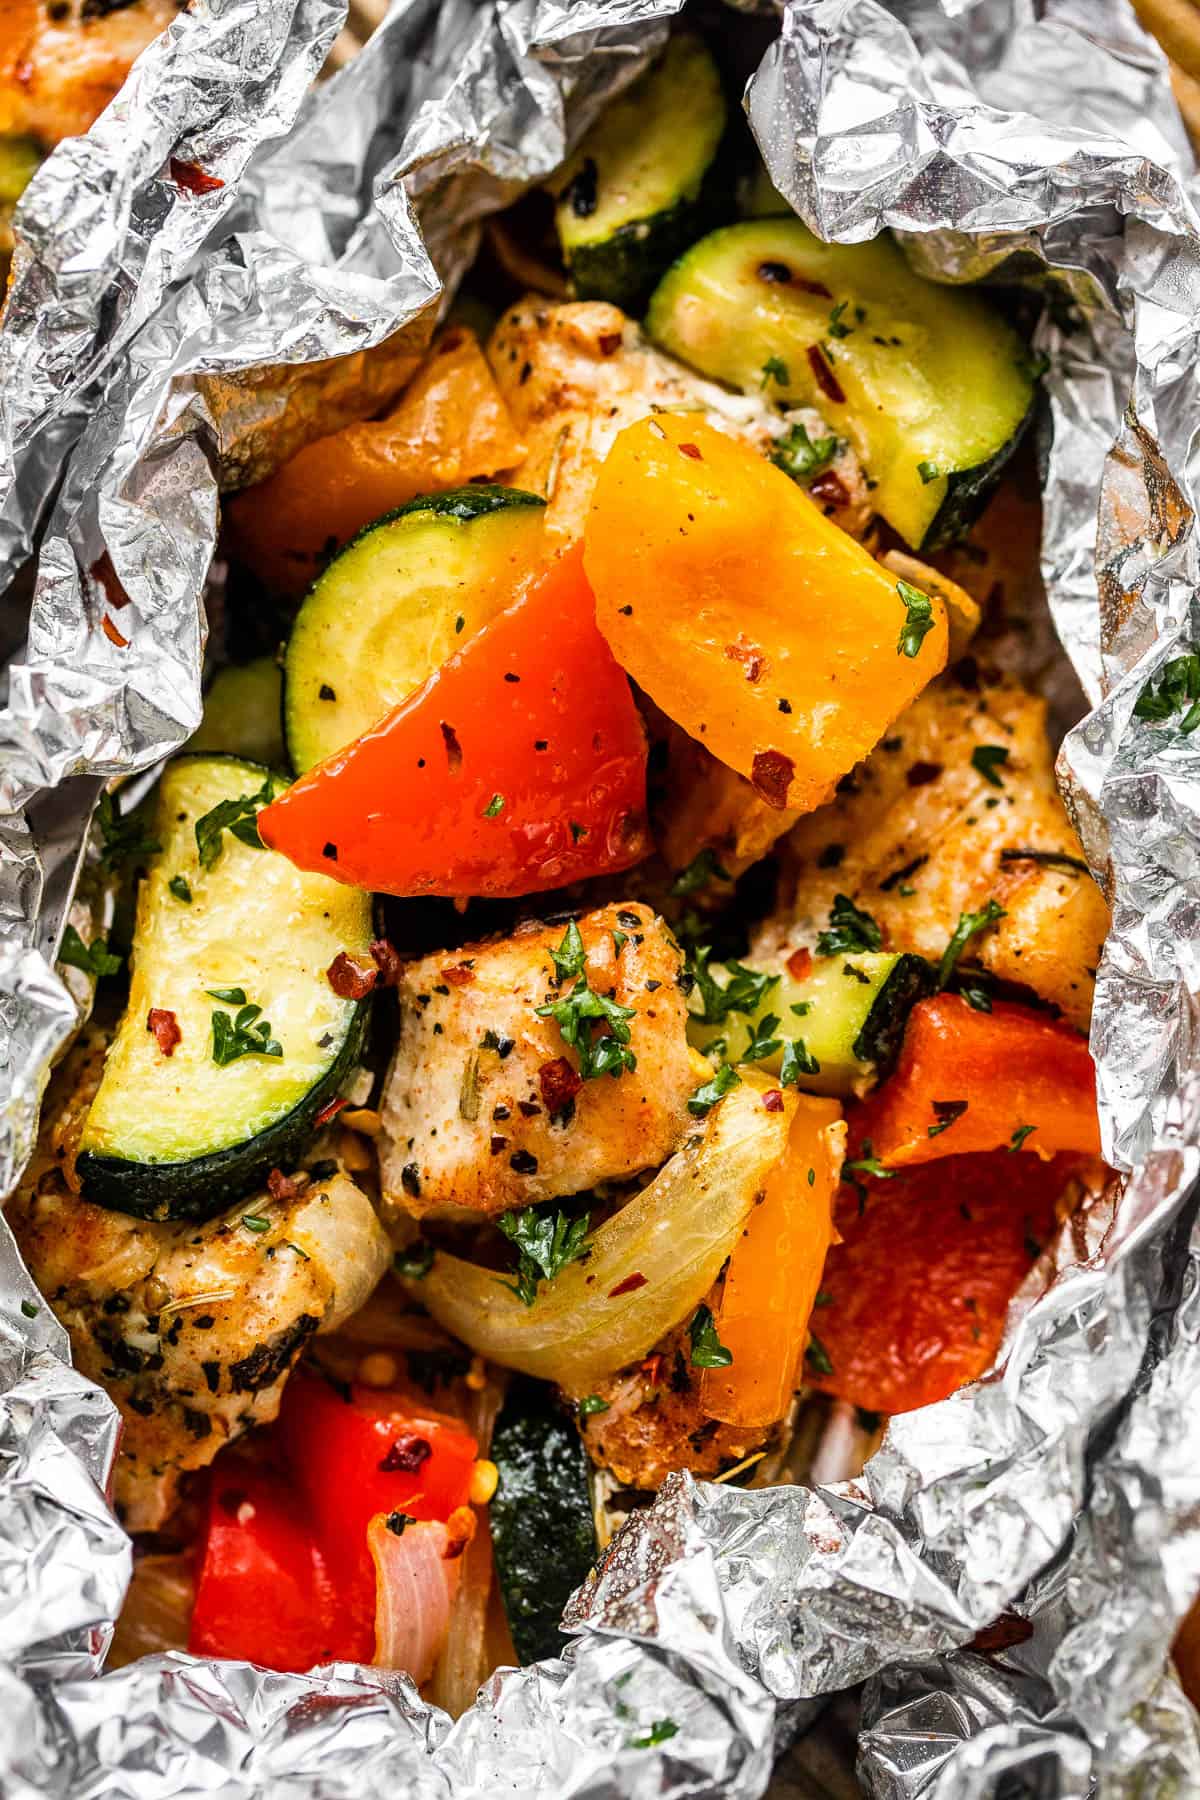 up close shot of diced chicken, sliced zucchini, and sliced peppers all layered in an aluminum foil packet.